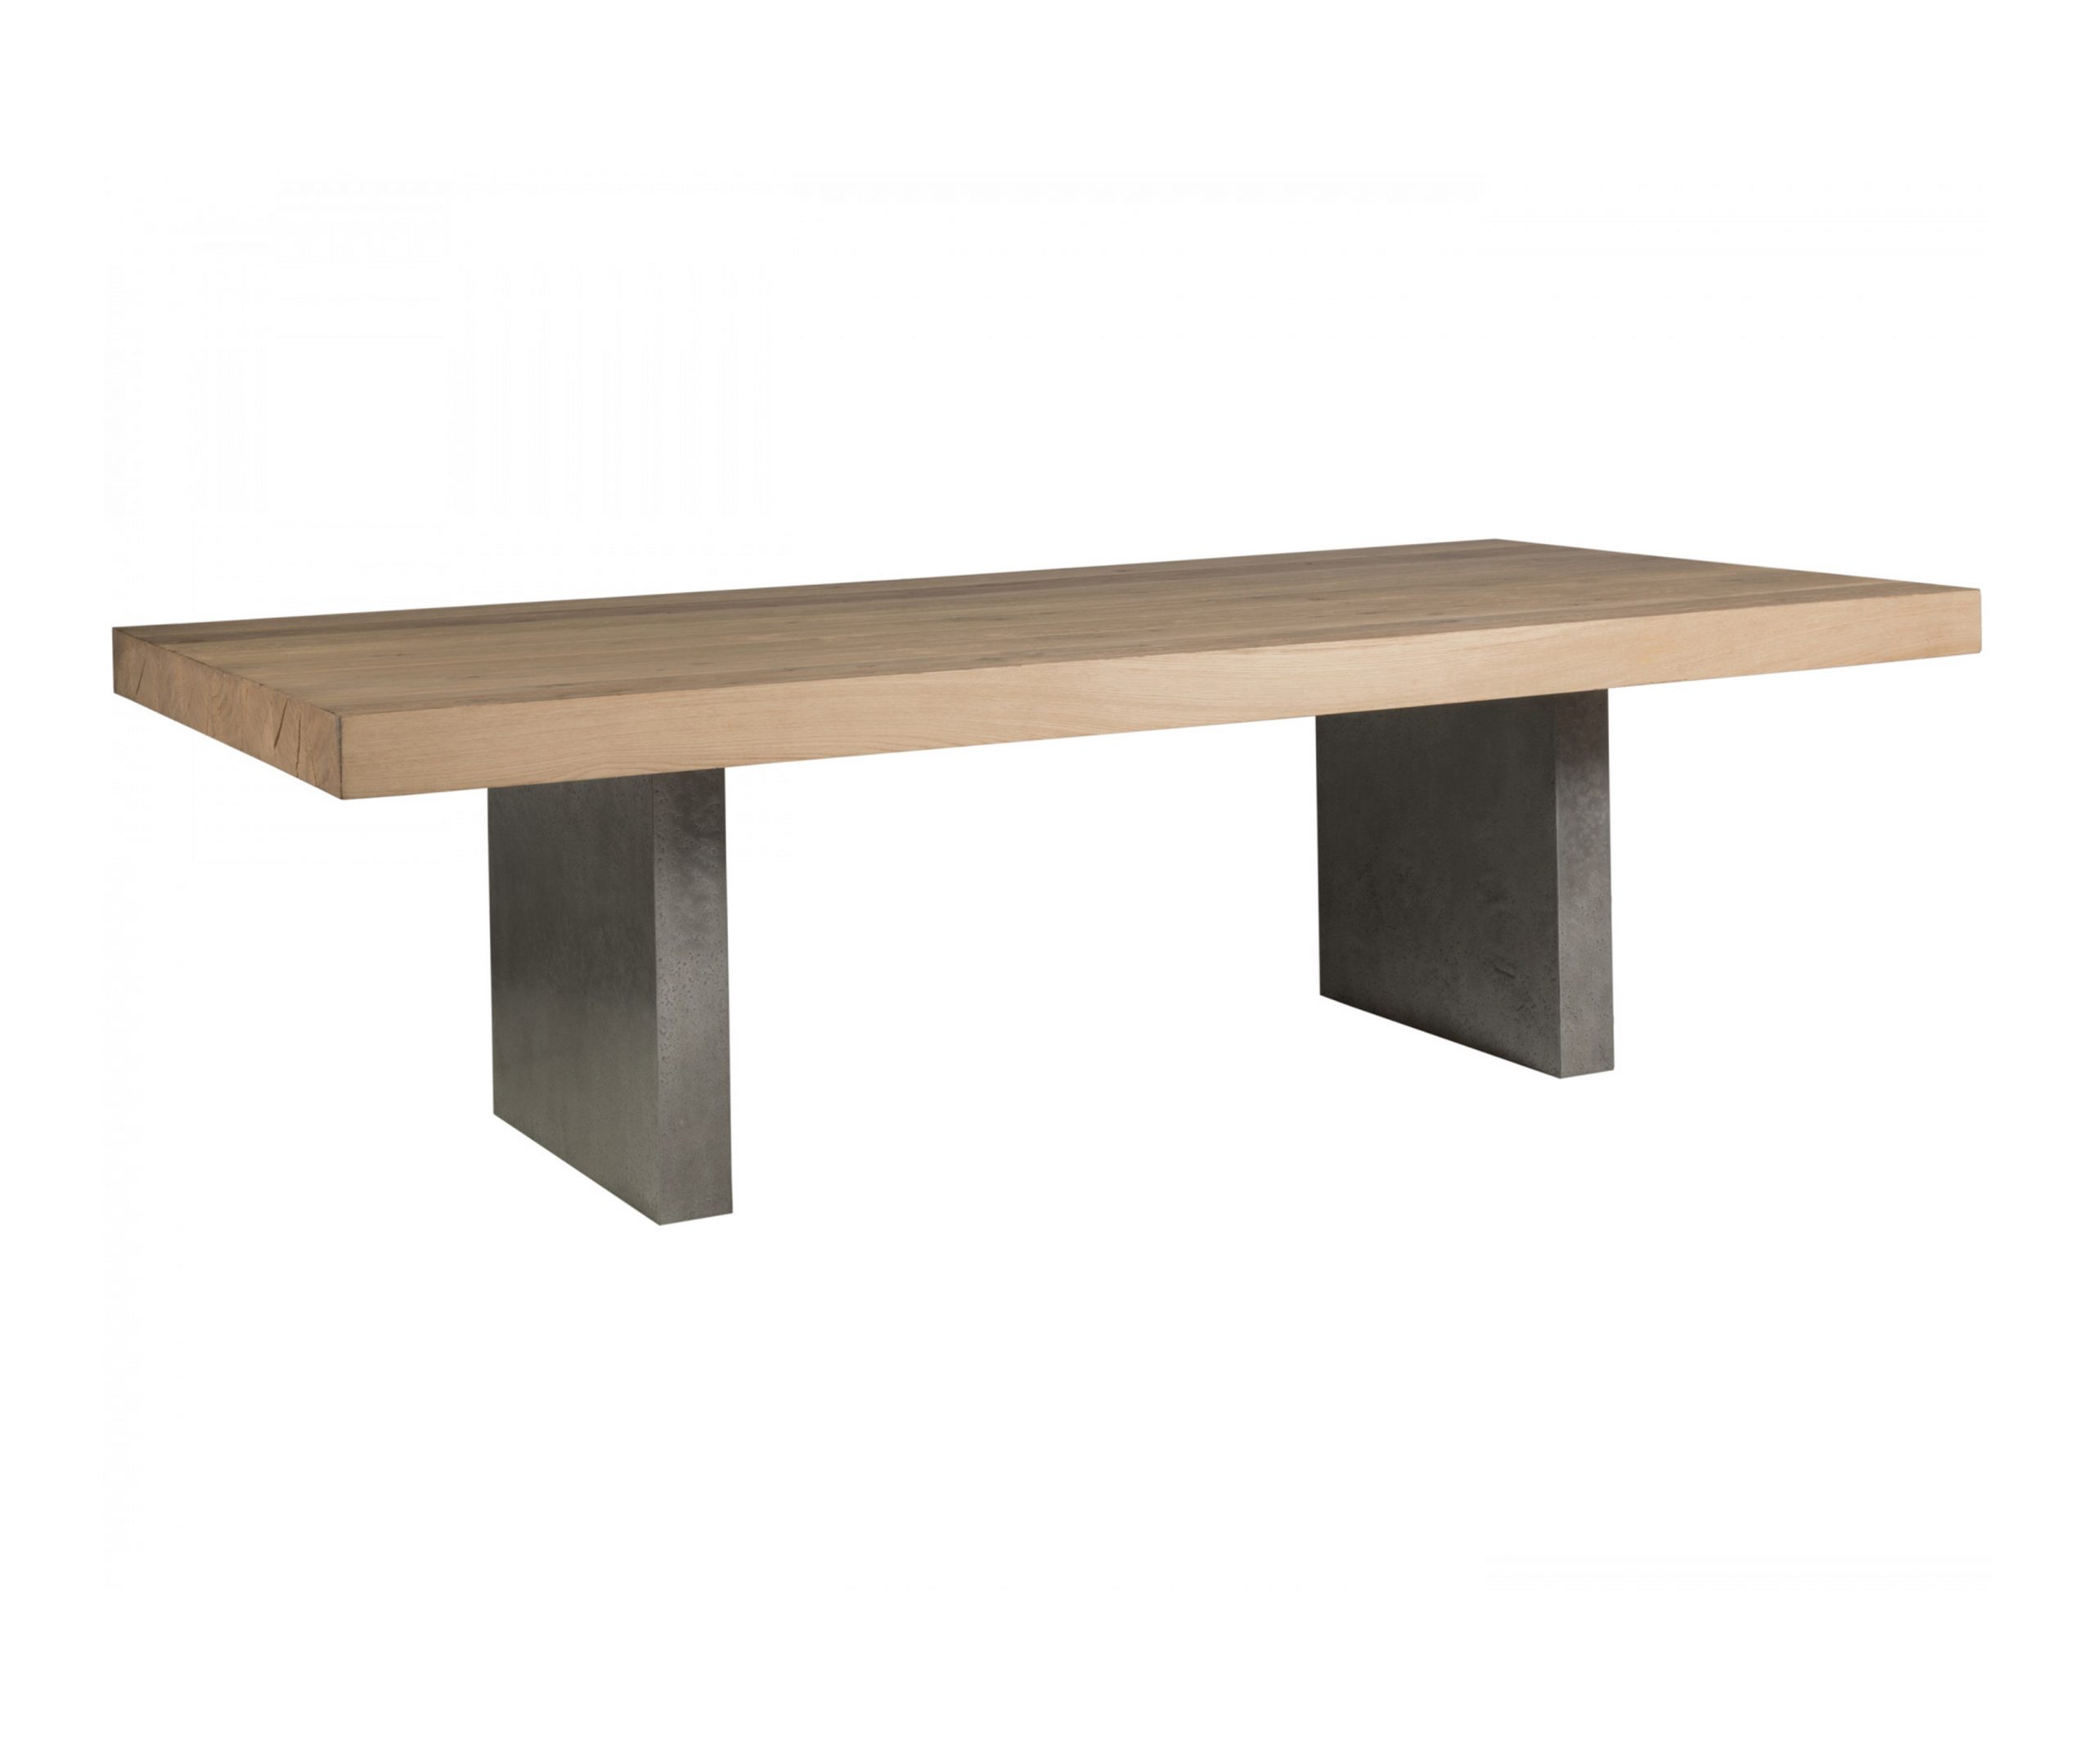 Lexington-Home-Brands_Verite-Rectangle-Dining-Table-1_int_products-scaled-1